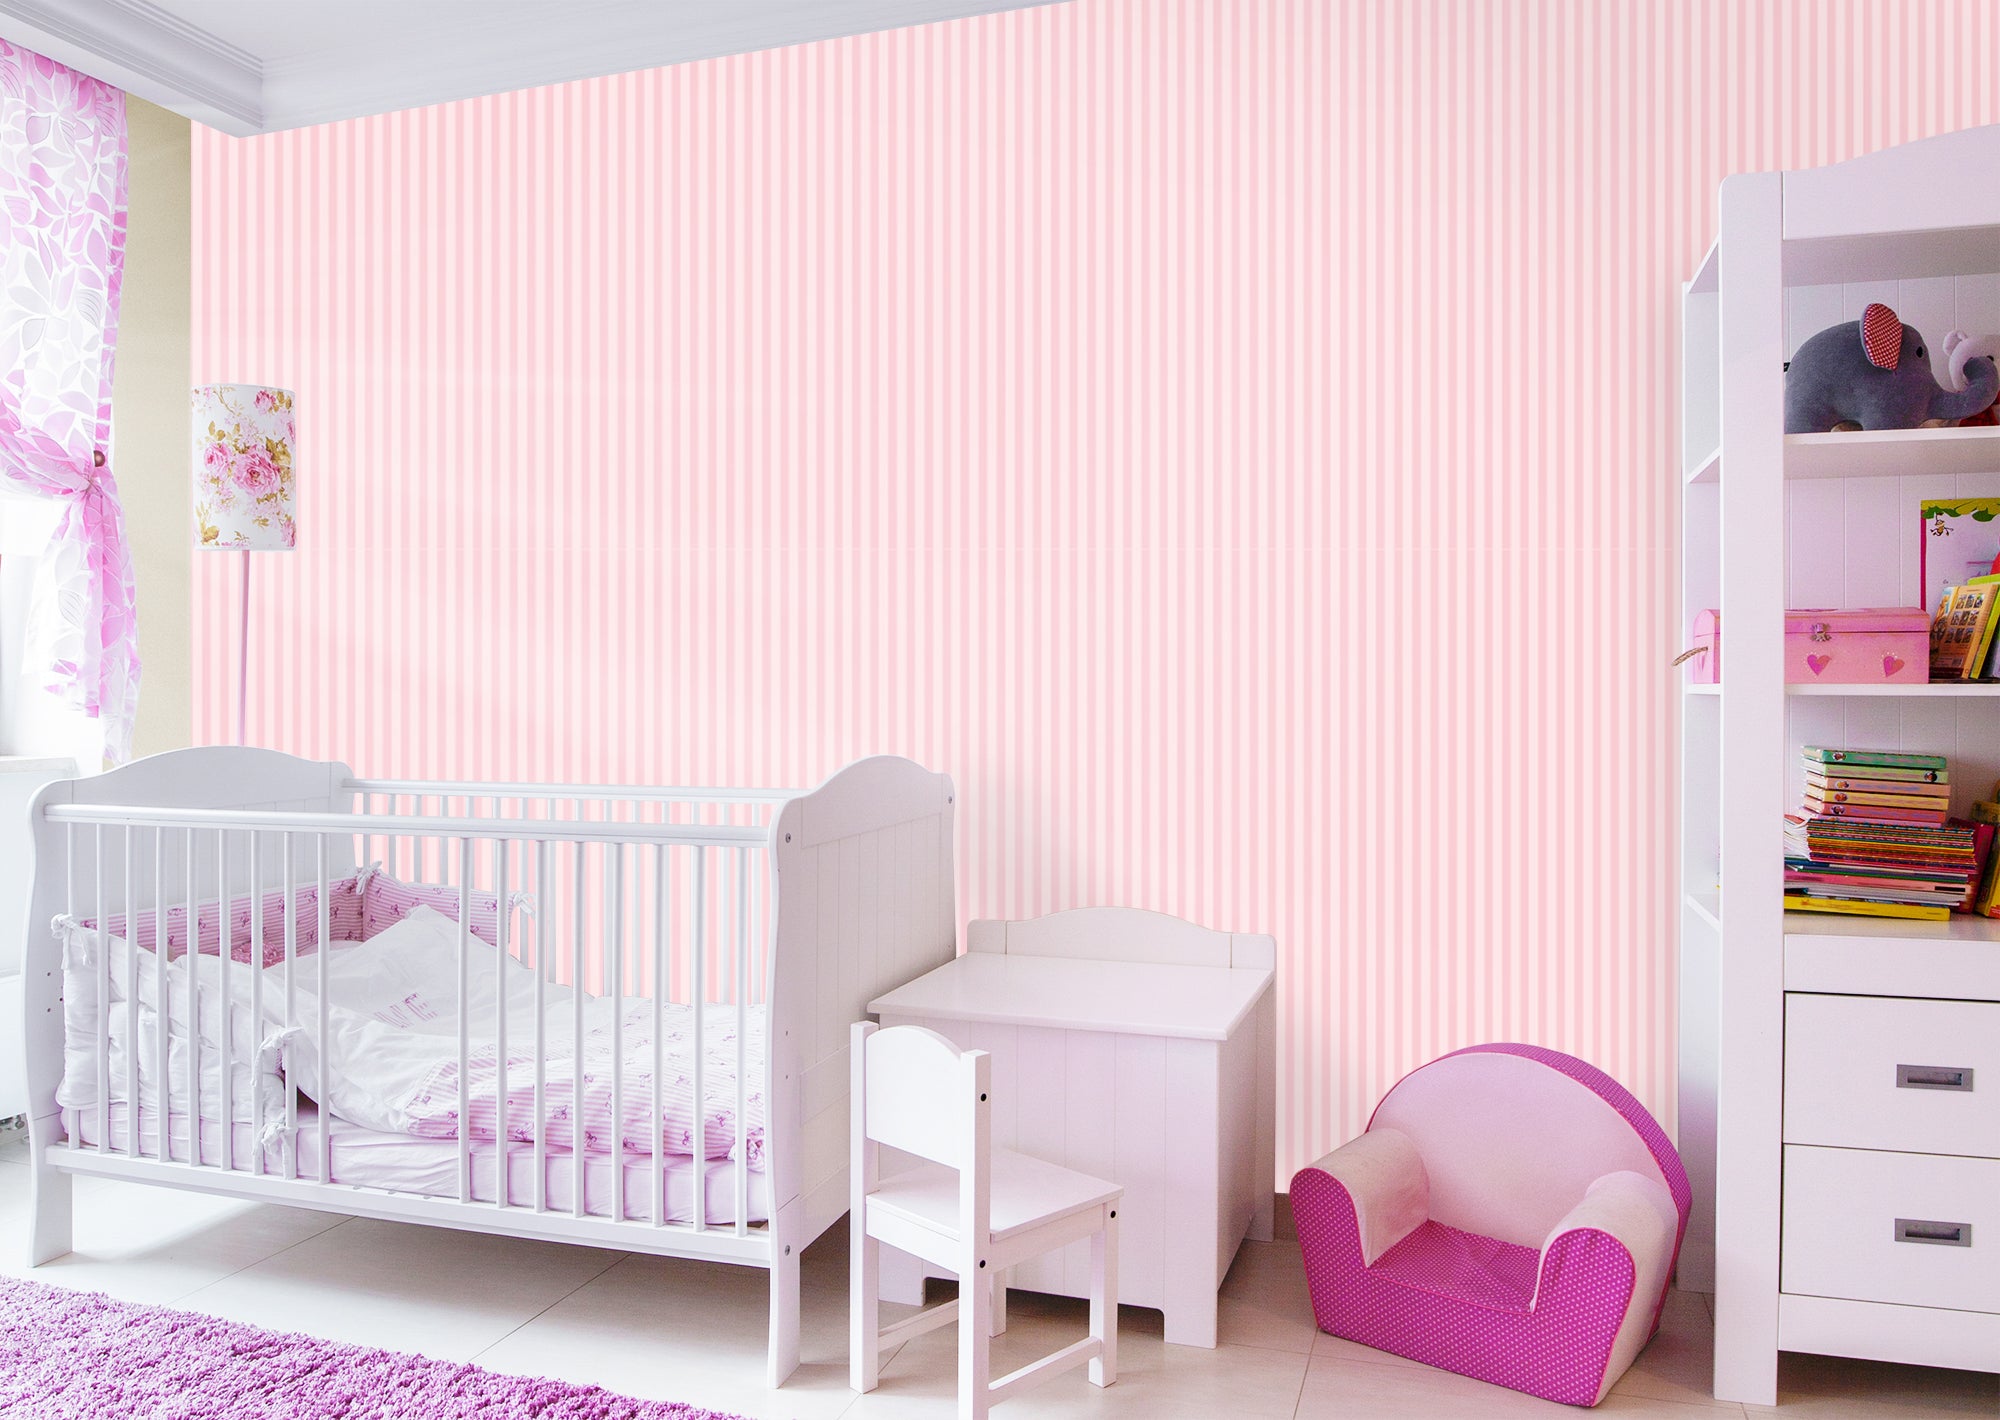 Dont Pink Twice About It - Removable Peel & Stick Wallpaper 12" x 12" Sample by Fathead